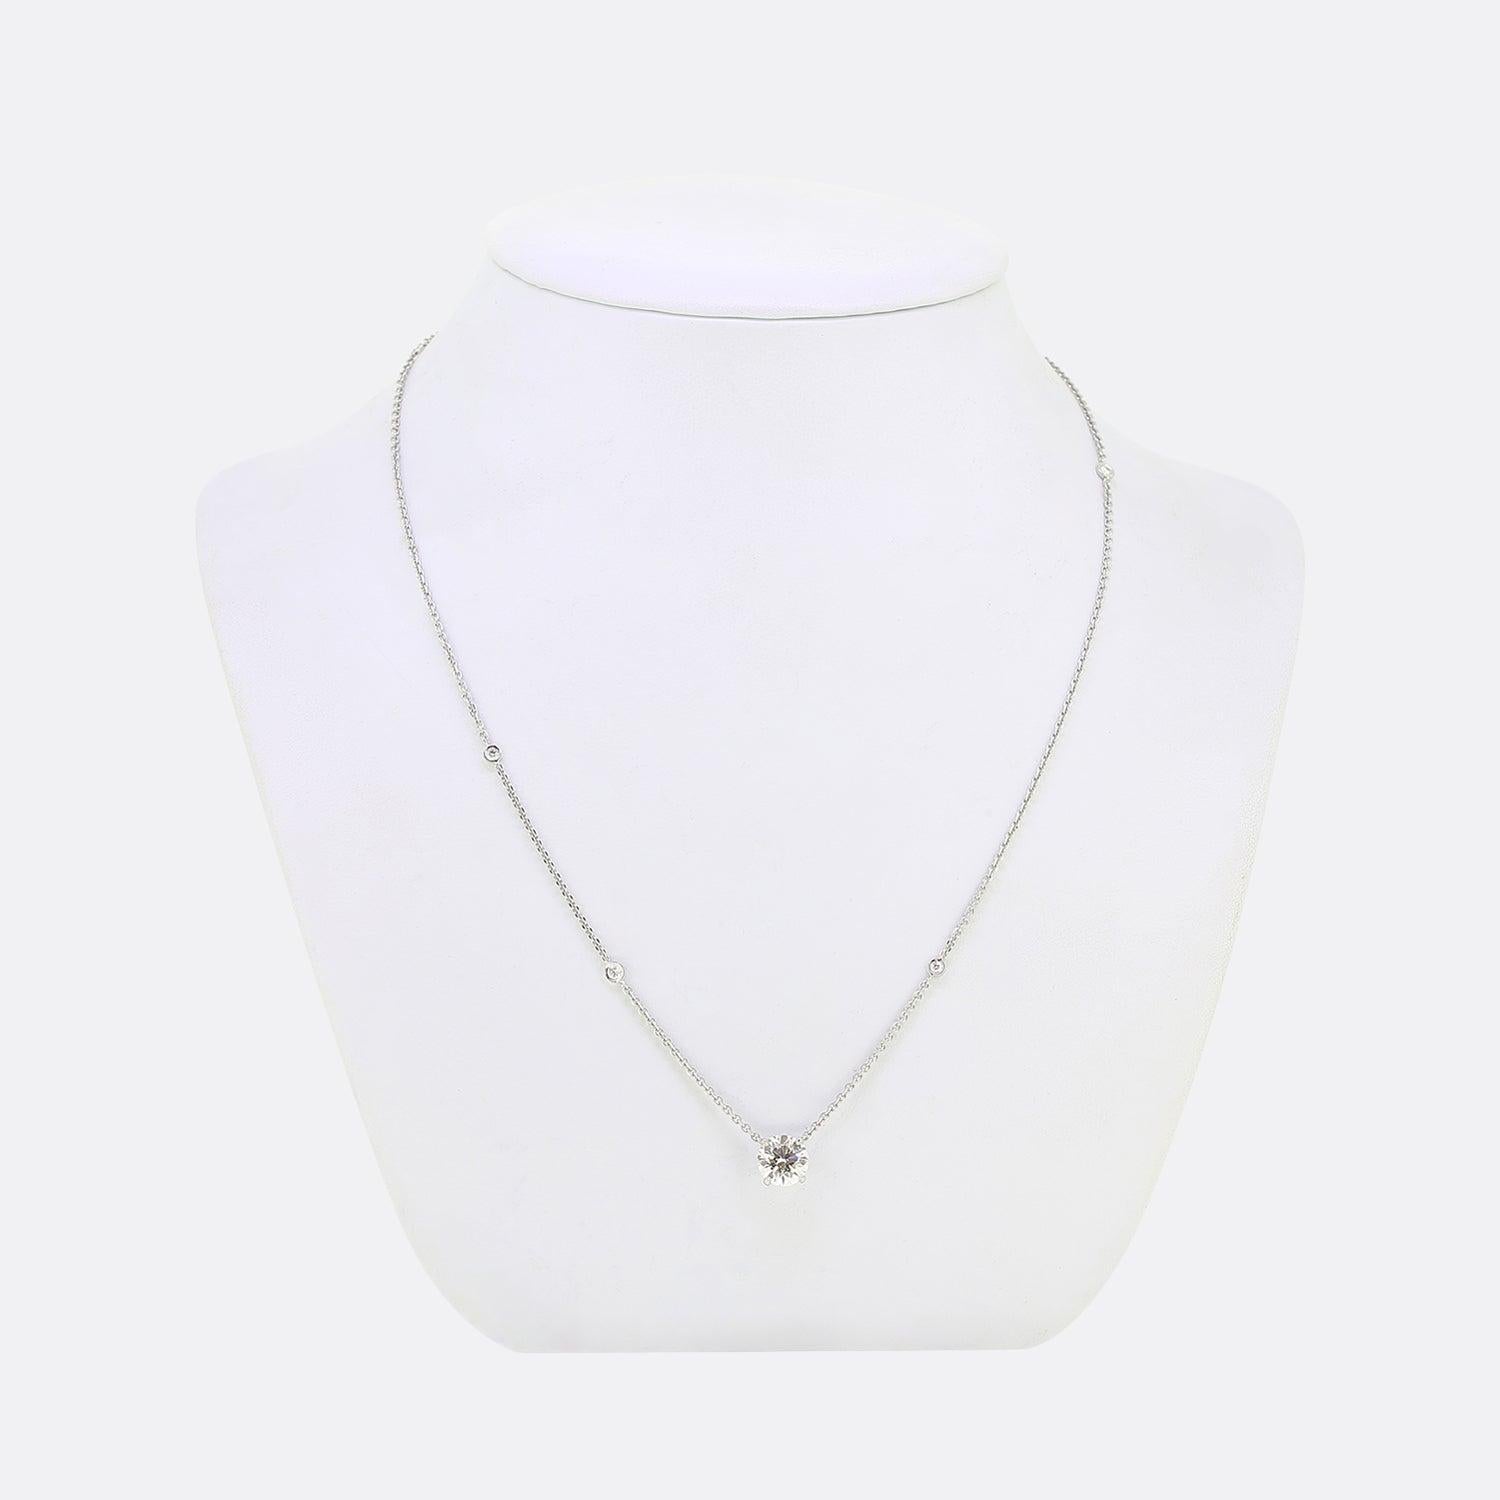 Here we have a stunning diamond necklace from the world renowned jewellery designer, Boodles. An elegant 18ct white gold belcher chain has been sporadically set with 5 rub-over set diamonds whilst playing host to a highly impressive 1.70ct round